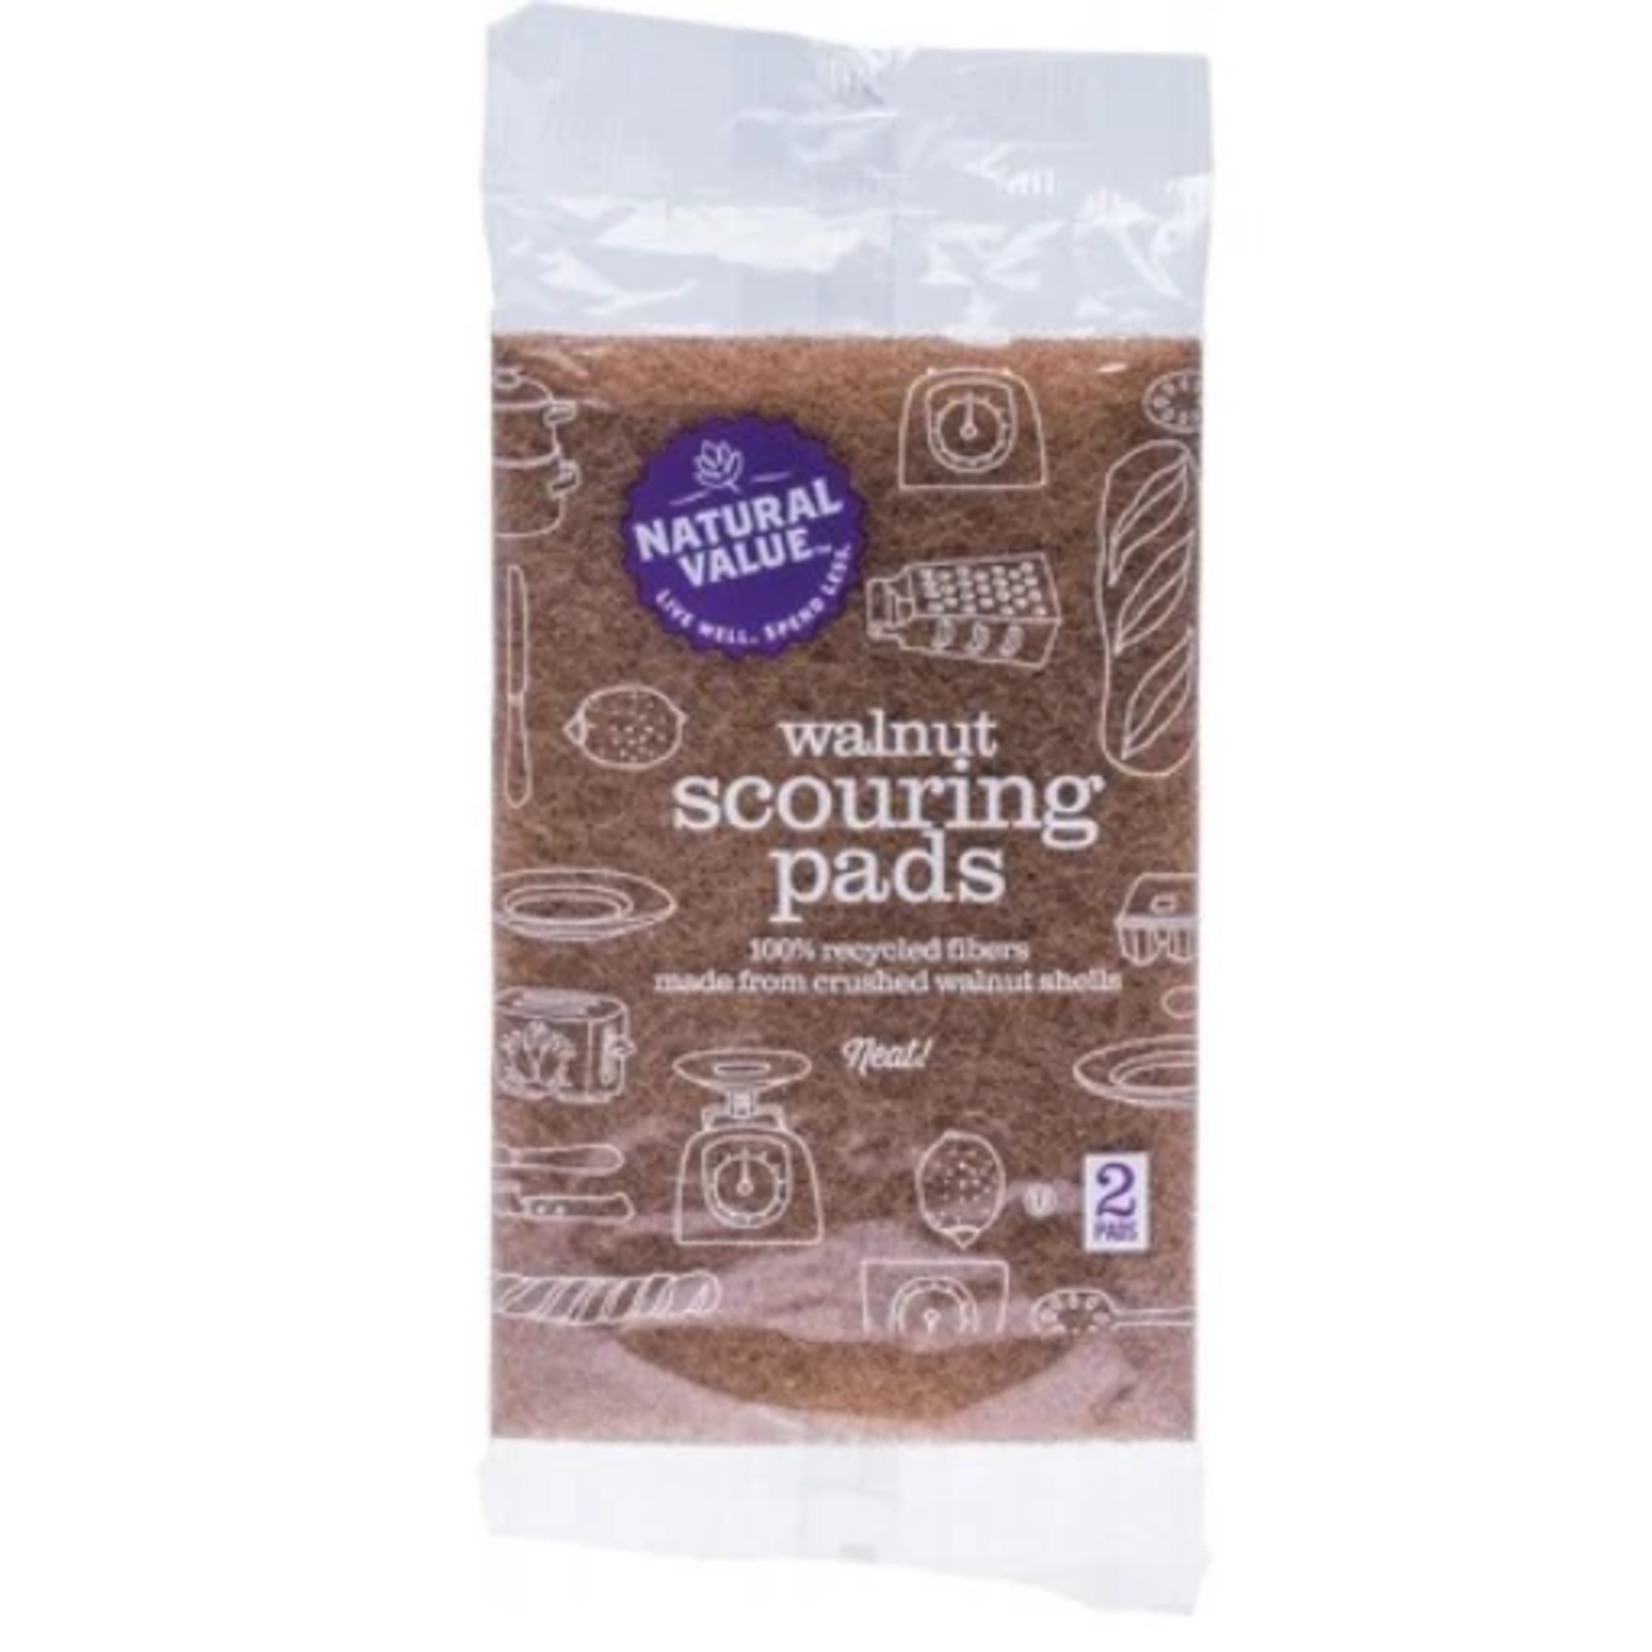 Natural Value Natural Value Walnut Scouring pads x 2